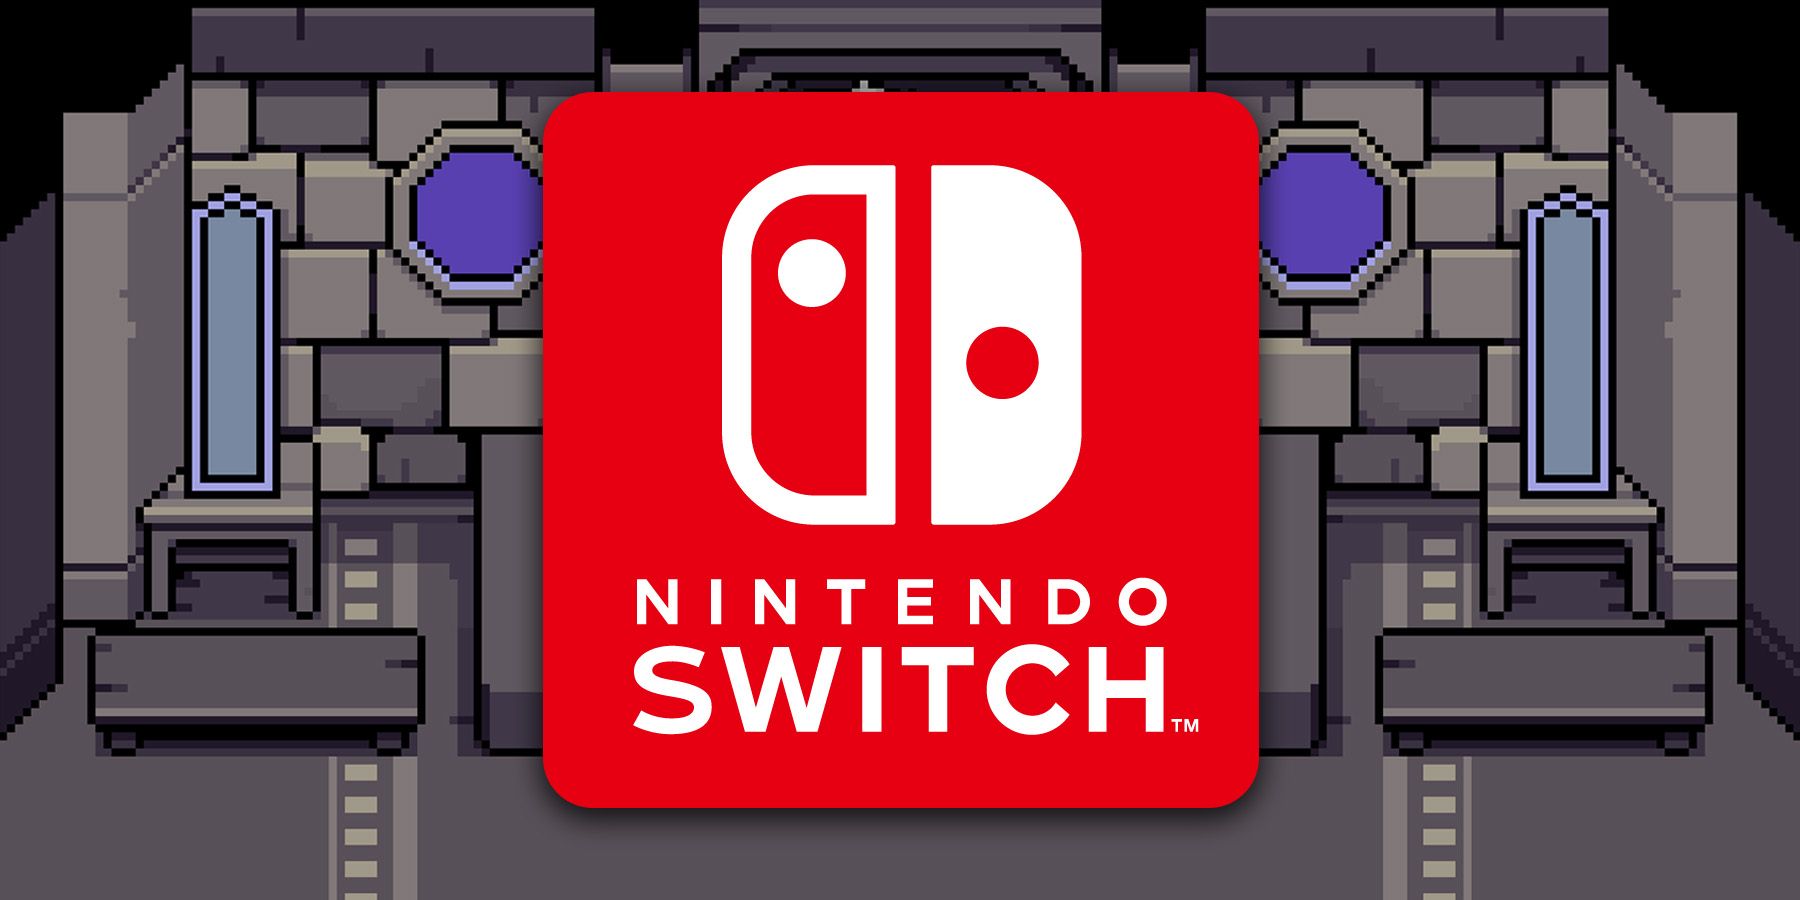 Nintendo Switch Logo in front of pixel art of an interior from Mother 3.